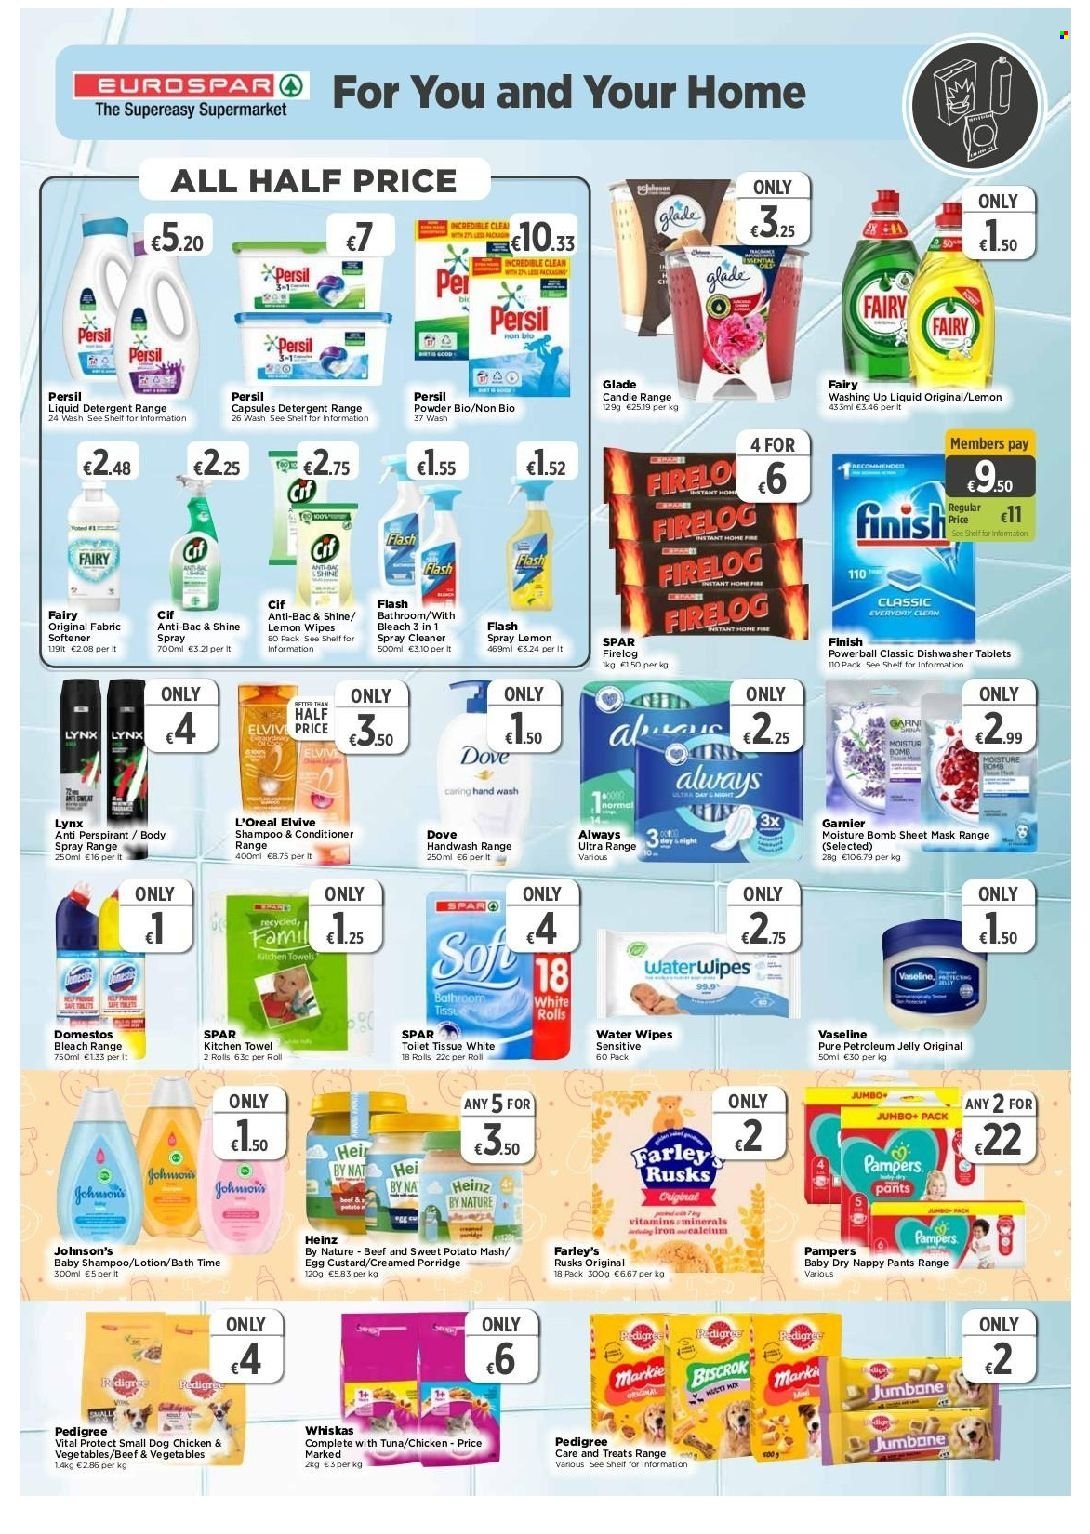 thumbnail - EUROSPAR offer  - 11.11.2021 - 01.12.2021 - Sales products - rusks, tuna, custard, eggs, jelly, Heinz, porridge, wipes, Pampers, pants, nappies, Johnson's, Dove, tissues, kitchen towels, detergent, Domestos, cleaner, bleach, Fairy, Cif, Persil, fabric softener, liquid detergent, dishwasher cleaner, dishwasher tablets, shampoo, hand wash, Vaseline, Garnier, L’Oréal, conditioner, body lotion, body spray, Glade, Whiskas, Pedigree. Page 7.